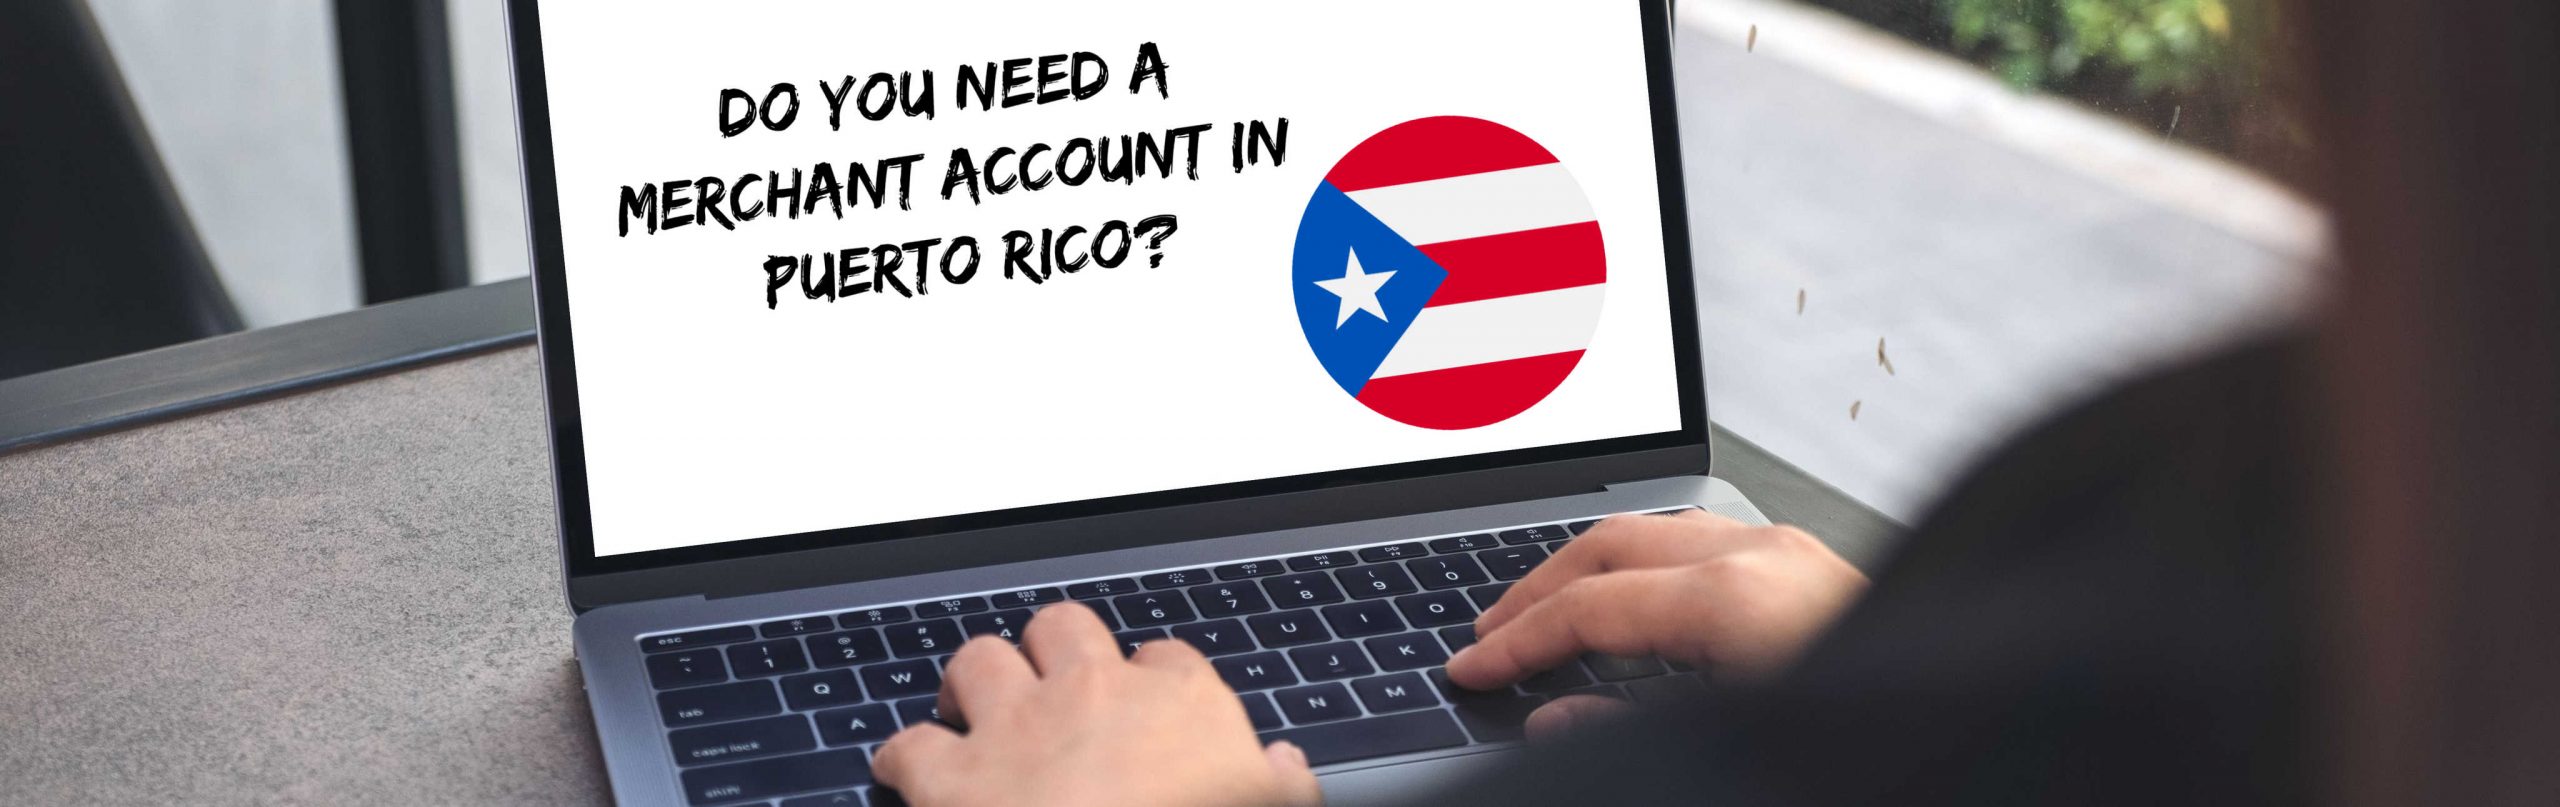 image of do you need a merchant account in puerto rico